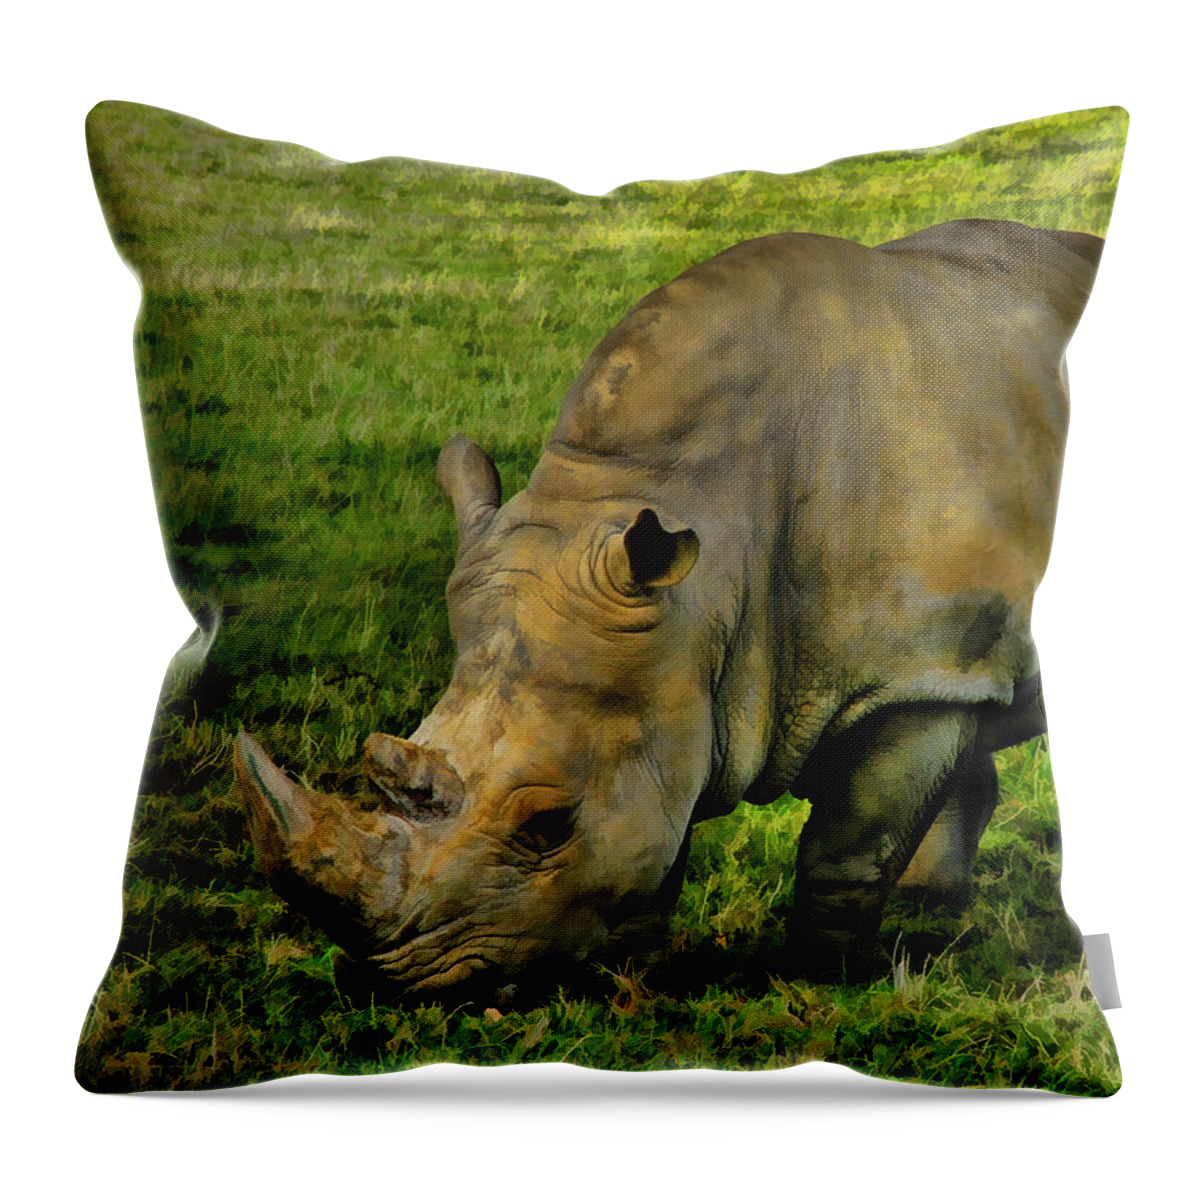 Rhinoceros Throw Pillow featuring the painting Rhinoceros 101 by Dean Wittle